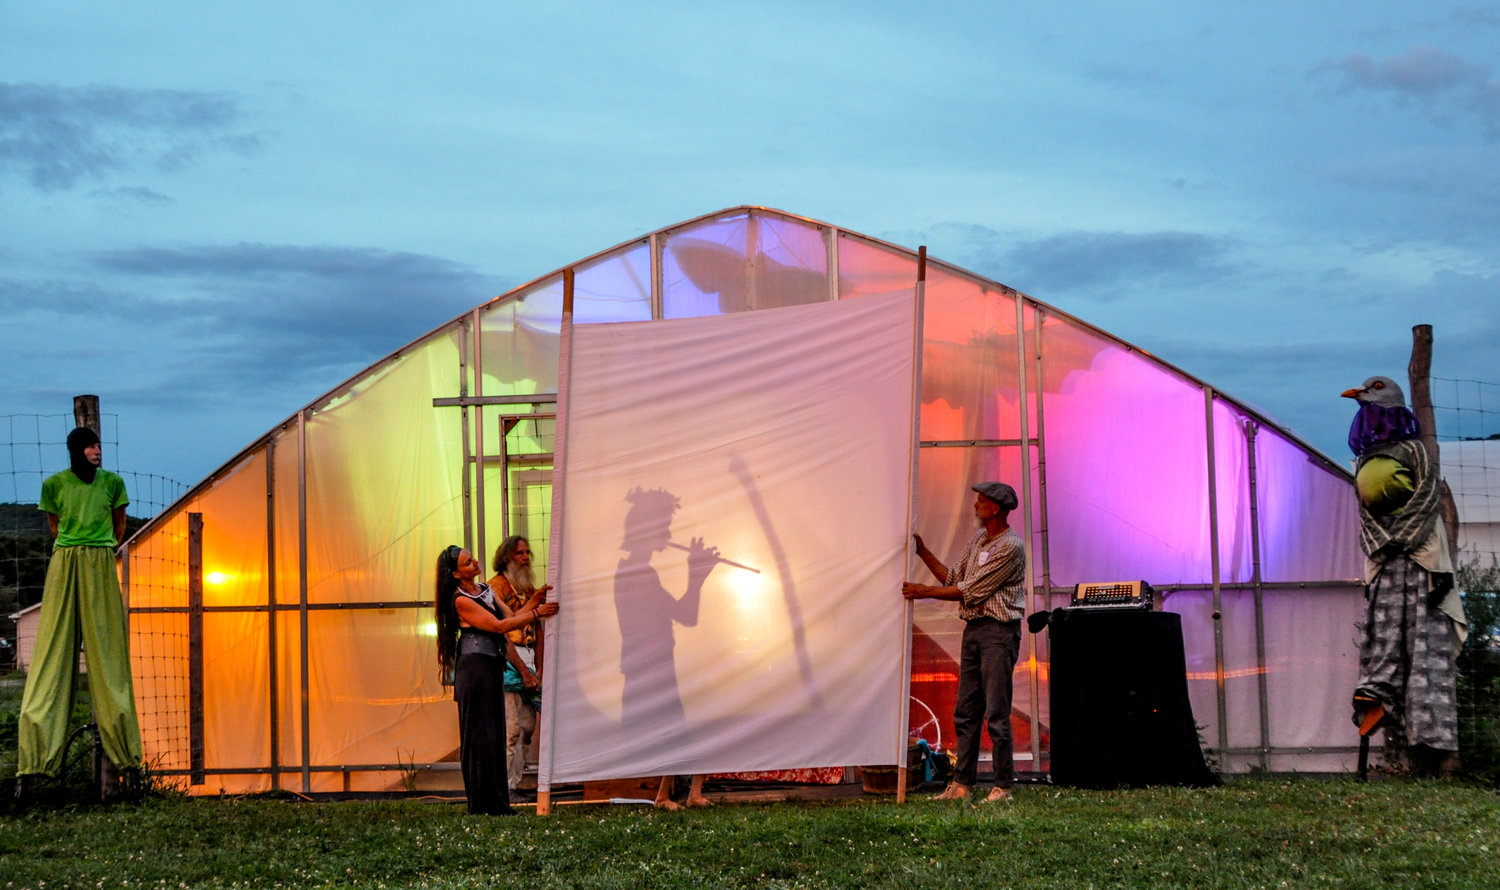 The second act of “Dream on the Farm” is a shadow play presentation of a past extinction with a climactic warning.